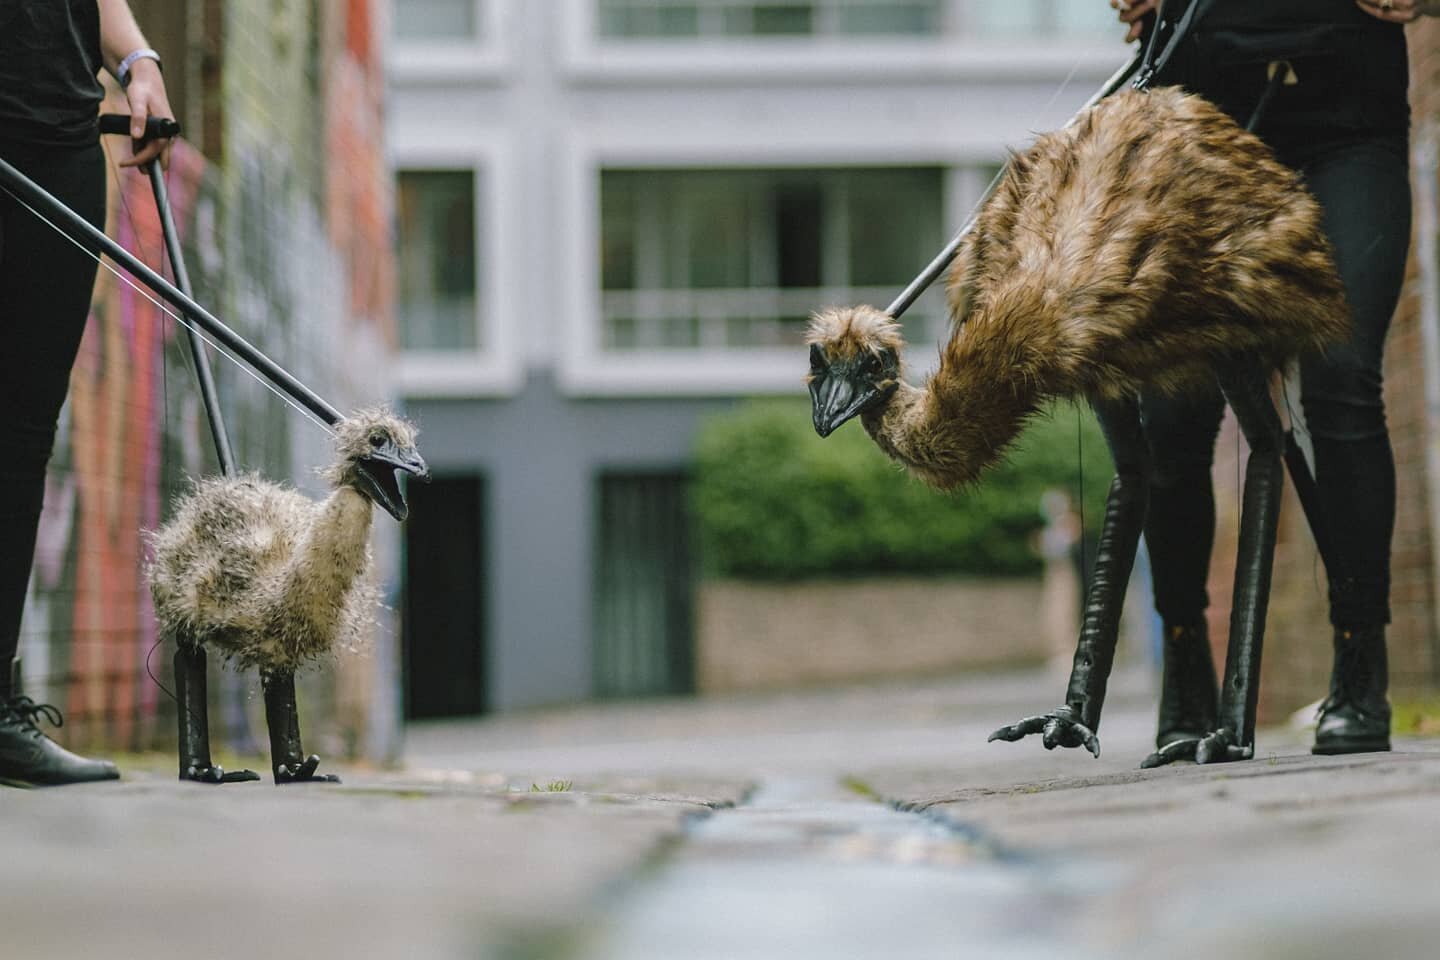 Adult and baby out for a stroll. Photos by @jarrydbravo 📷 ... Huge thanks to Jarryd and Allanah @thehouseofarax for helping out with this shoot! ❤️❤️❤️
.
.
Emu puppets created for @hotdadproductions #theemuwar
.
Puppetsmithery build team @jessicadav